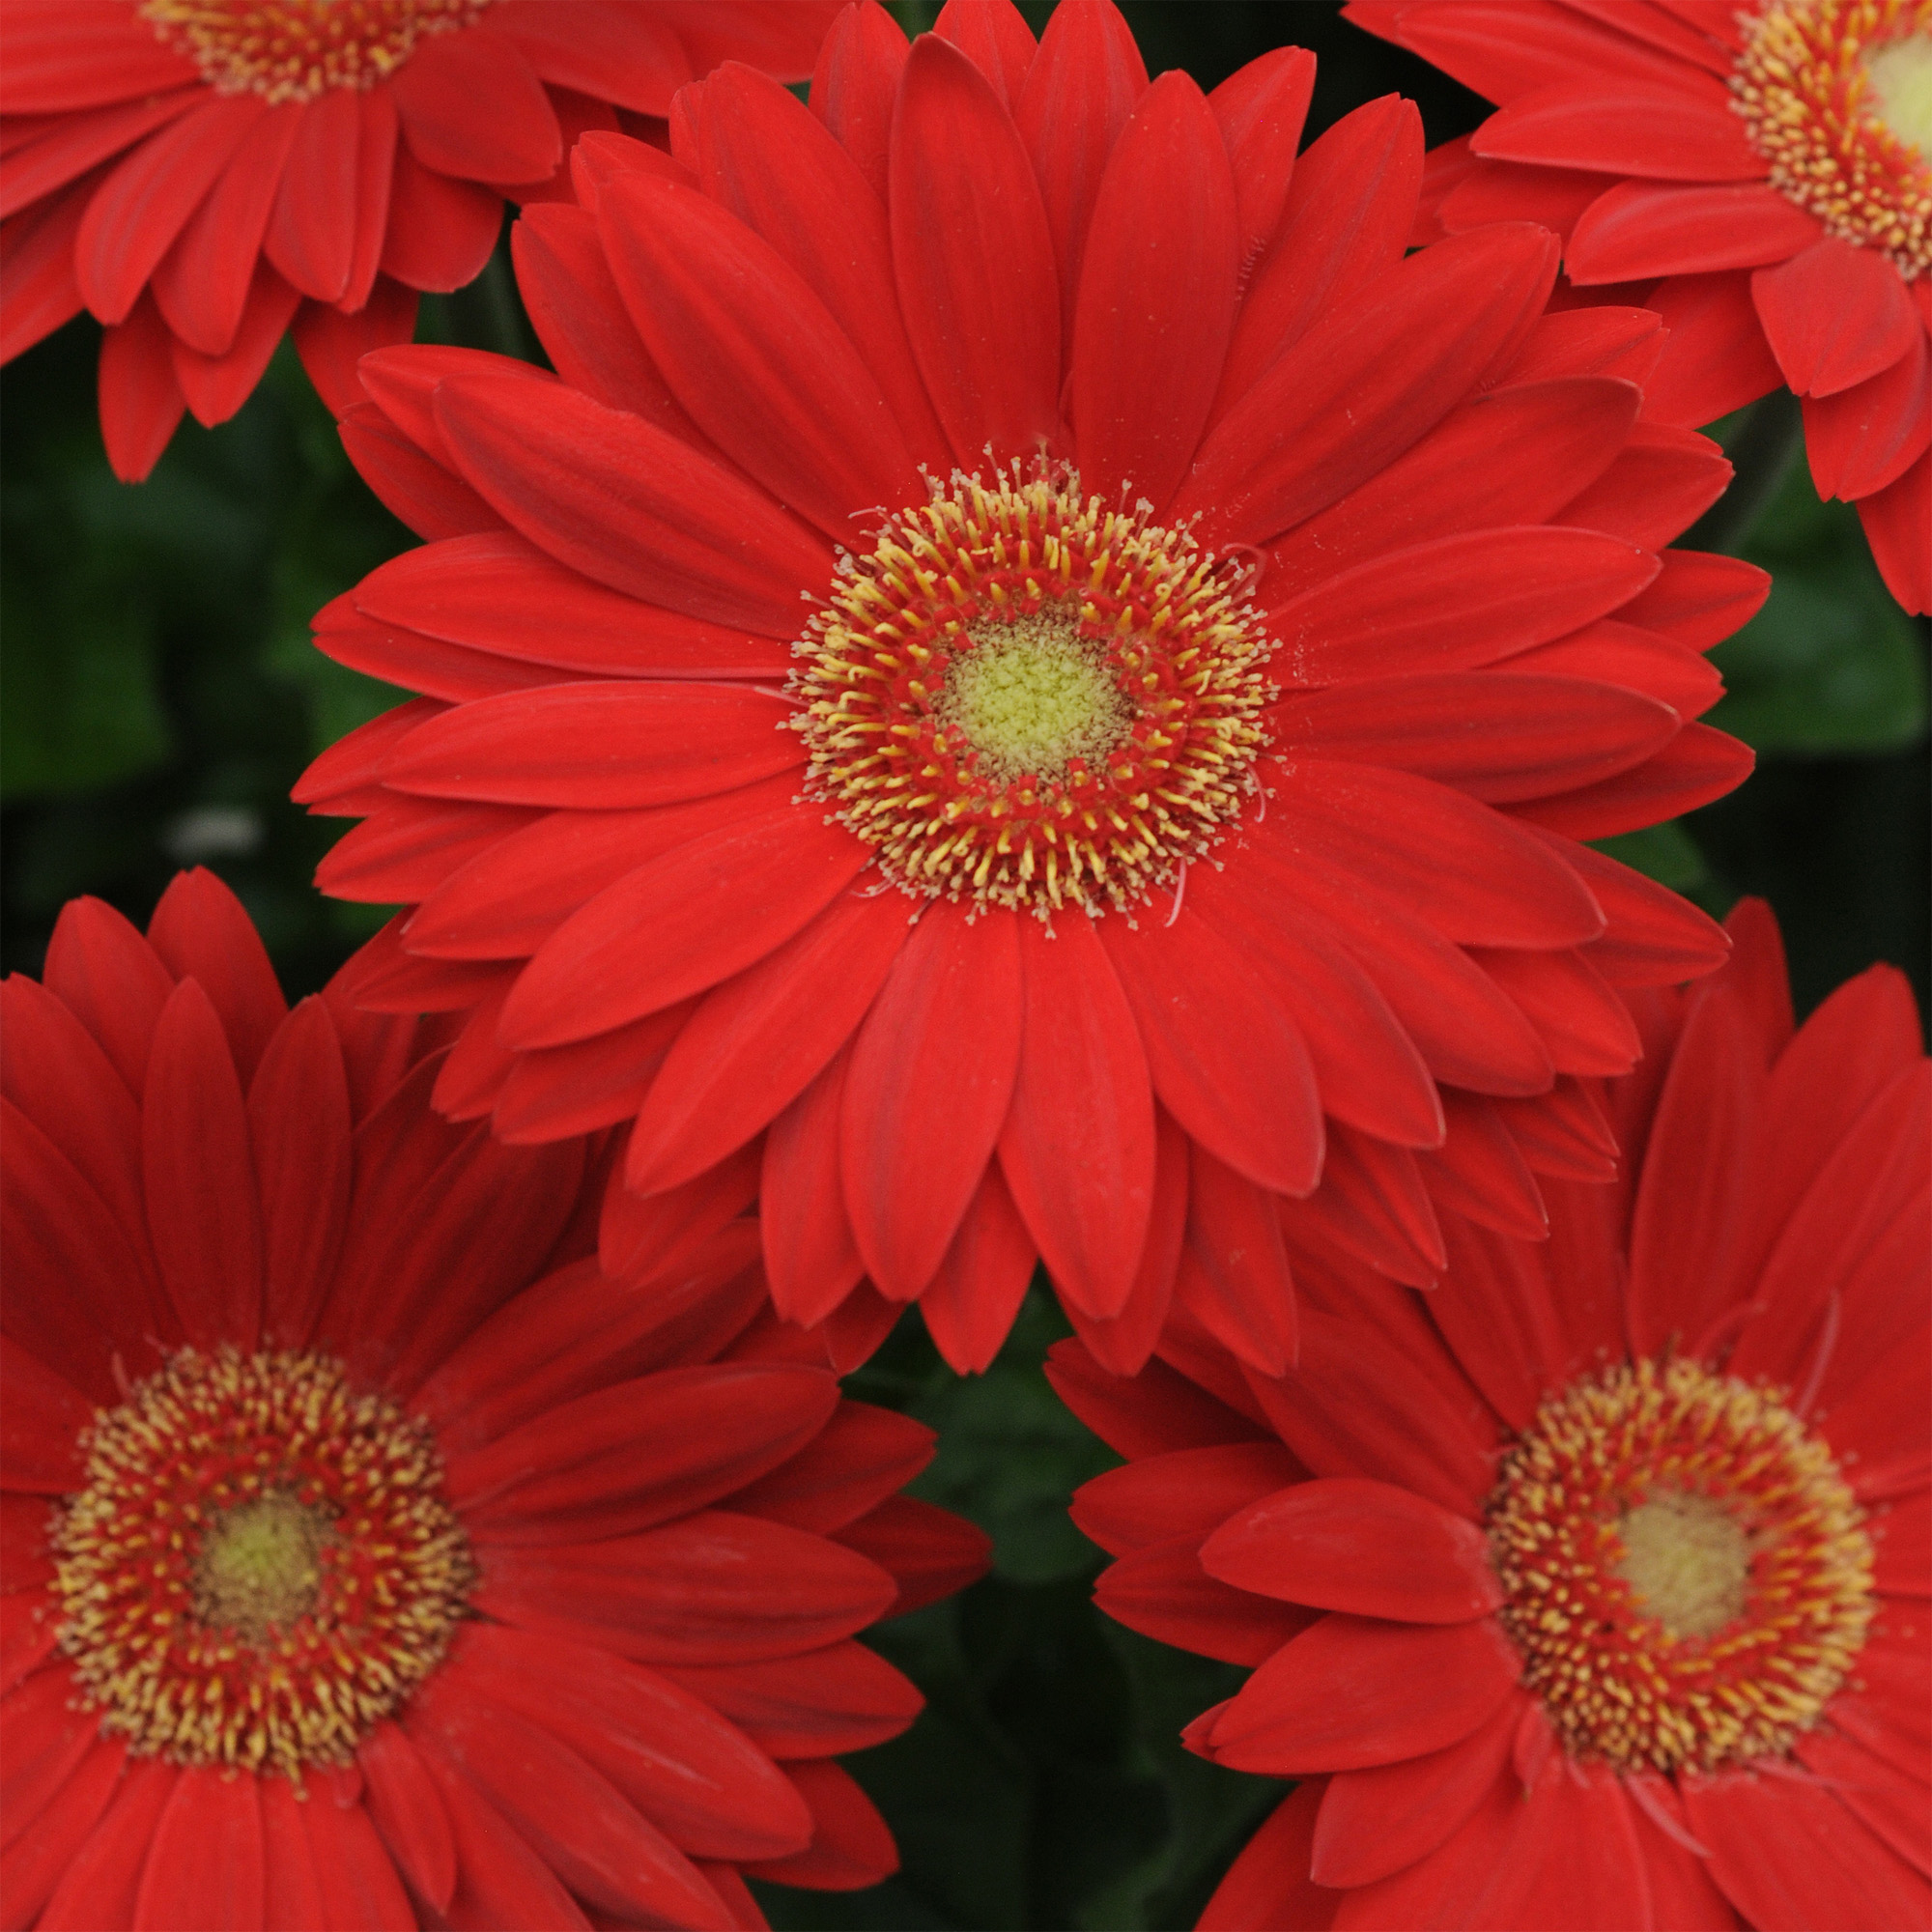 Red Daisy Image